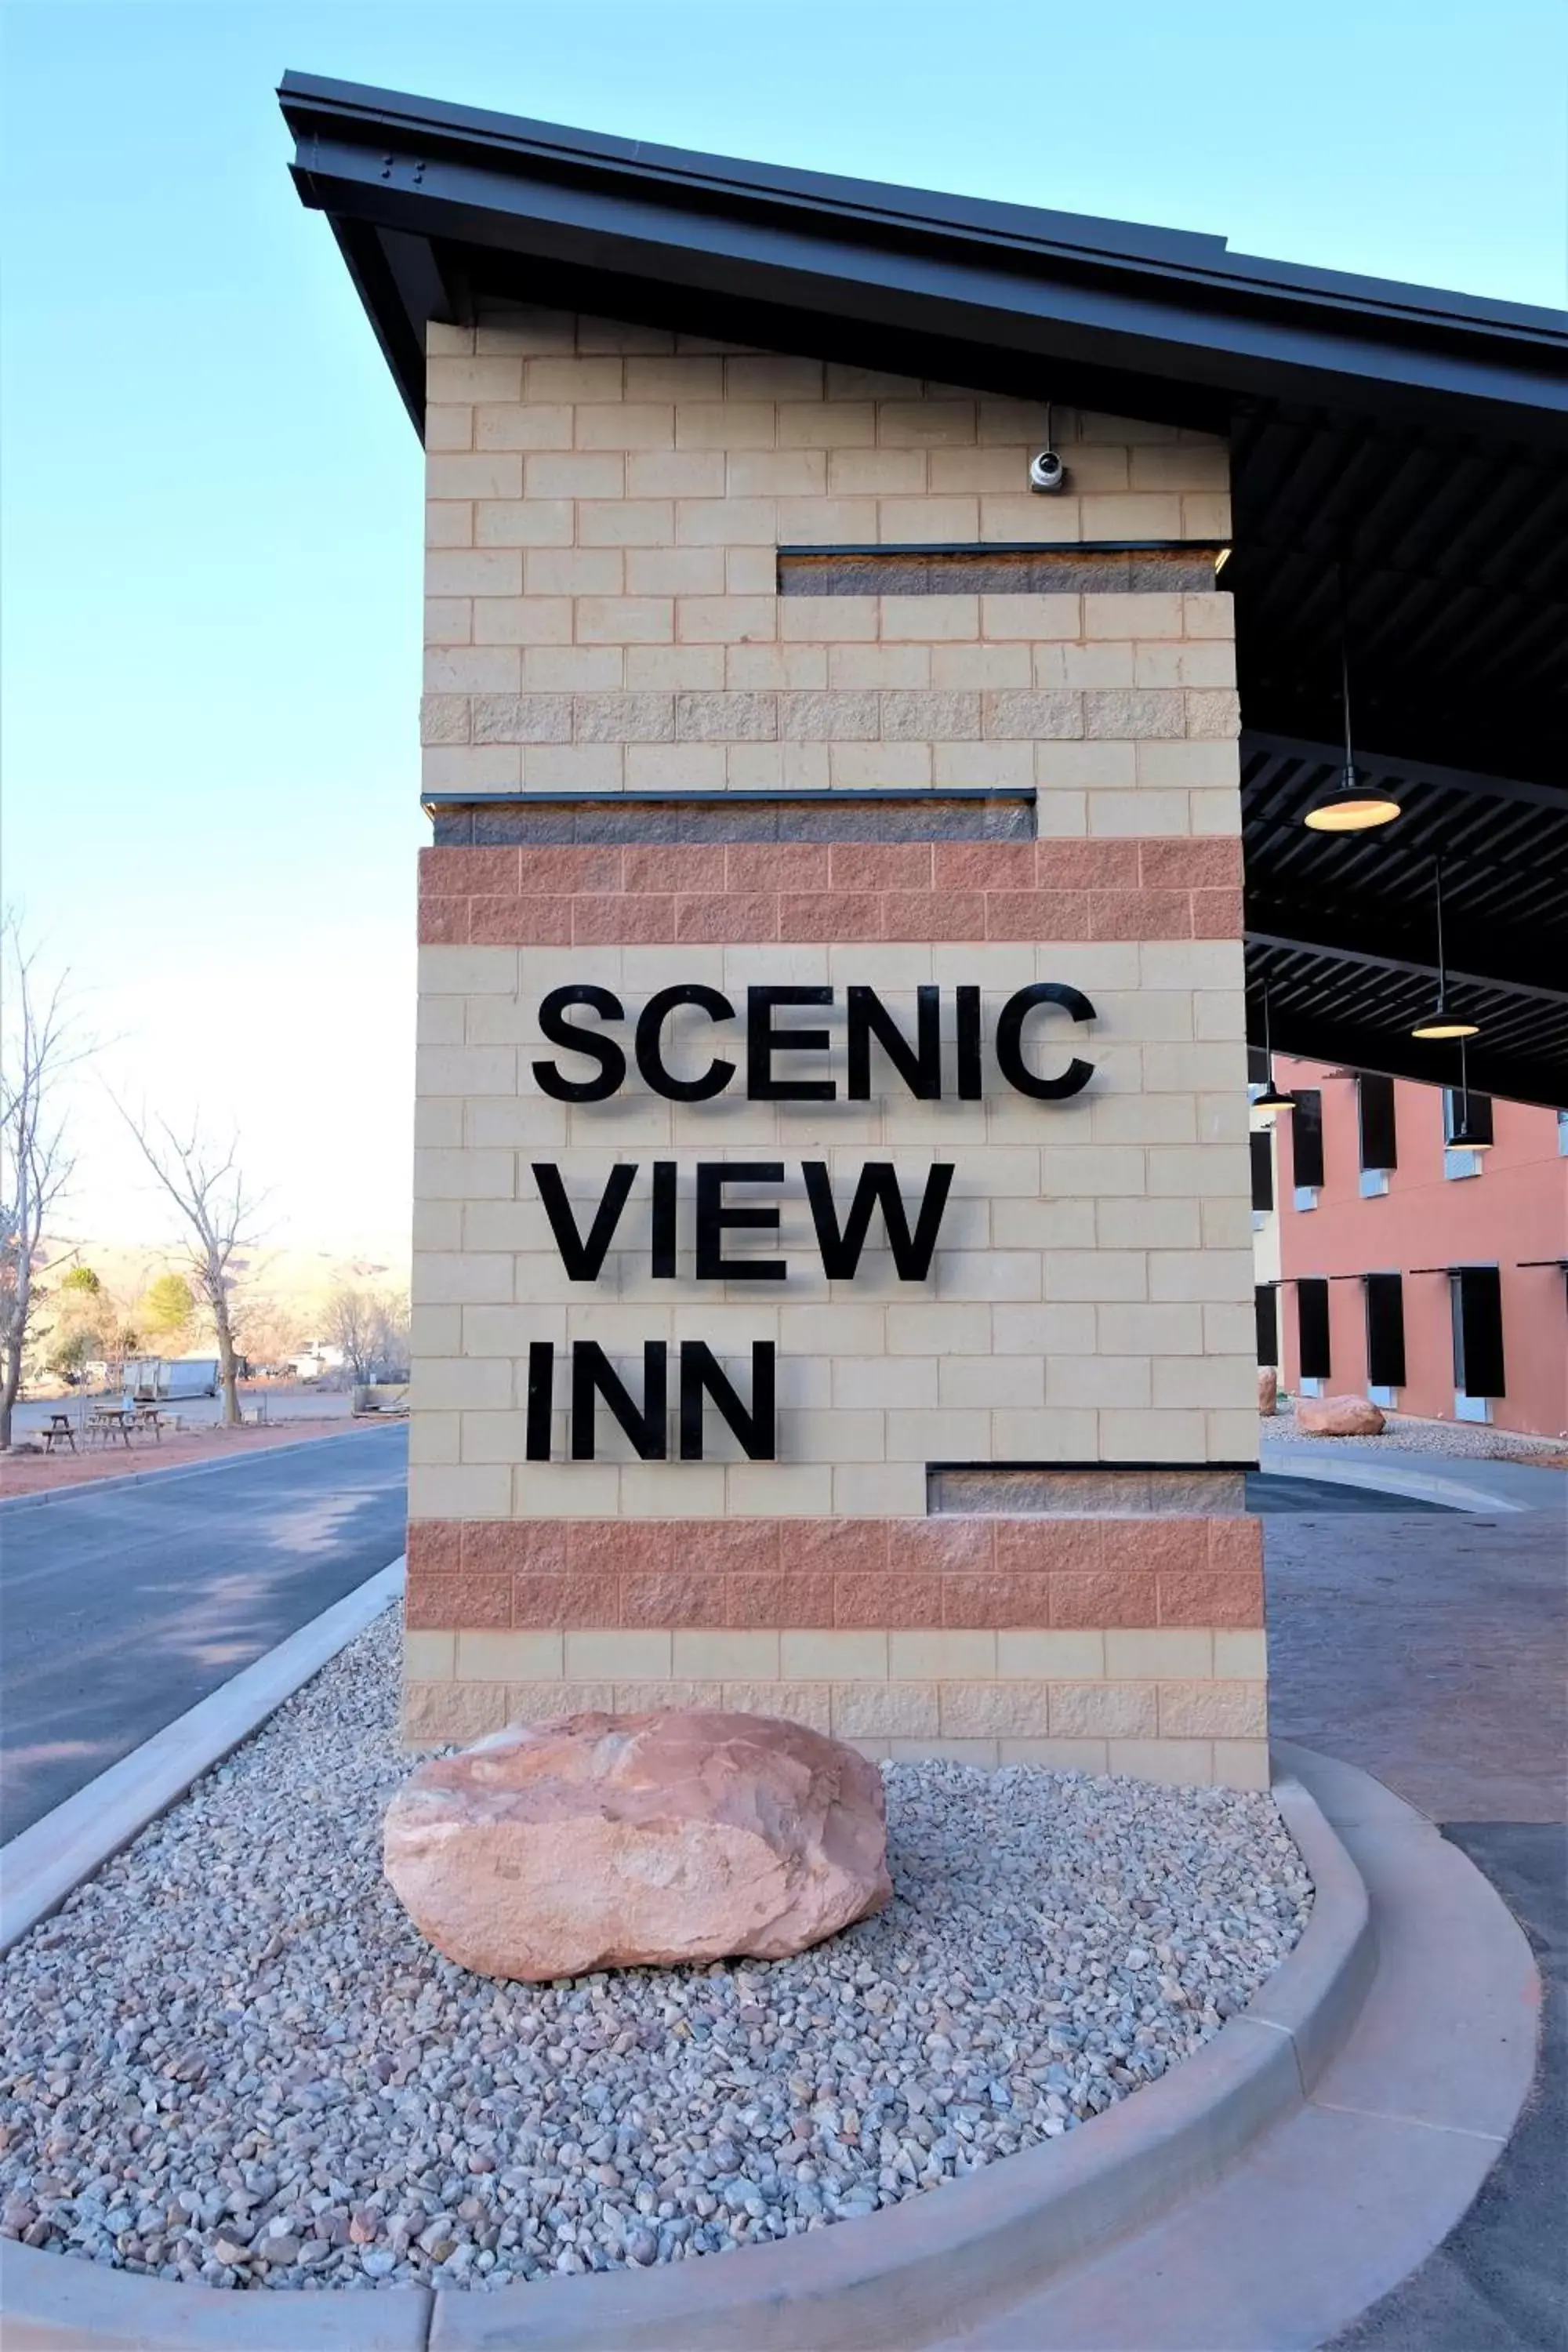 Property logo or sign in Scenic View Inn & Suites Moab